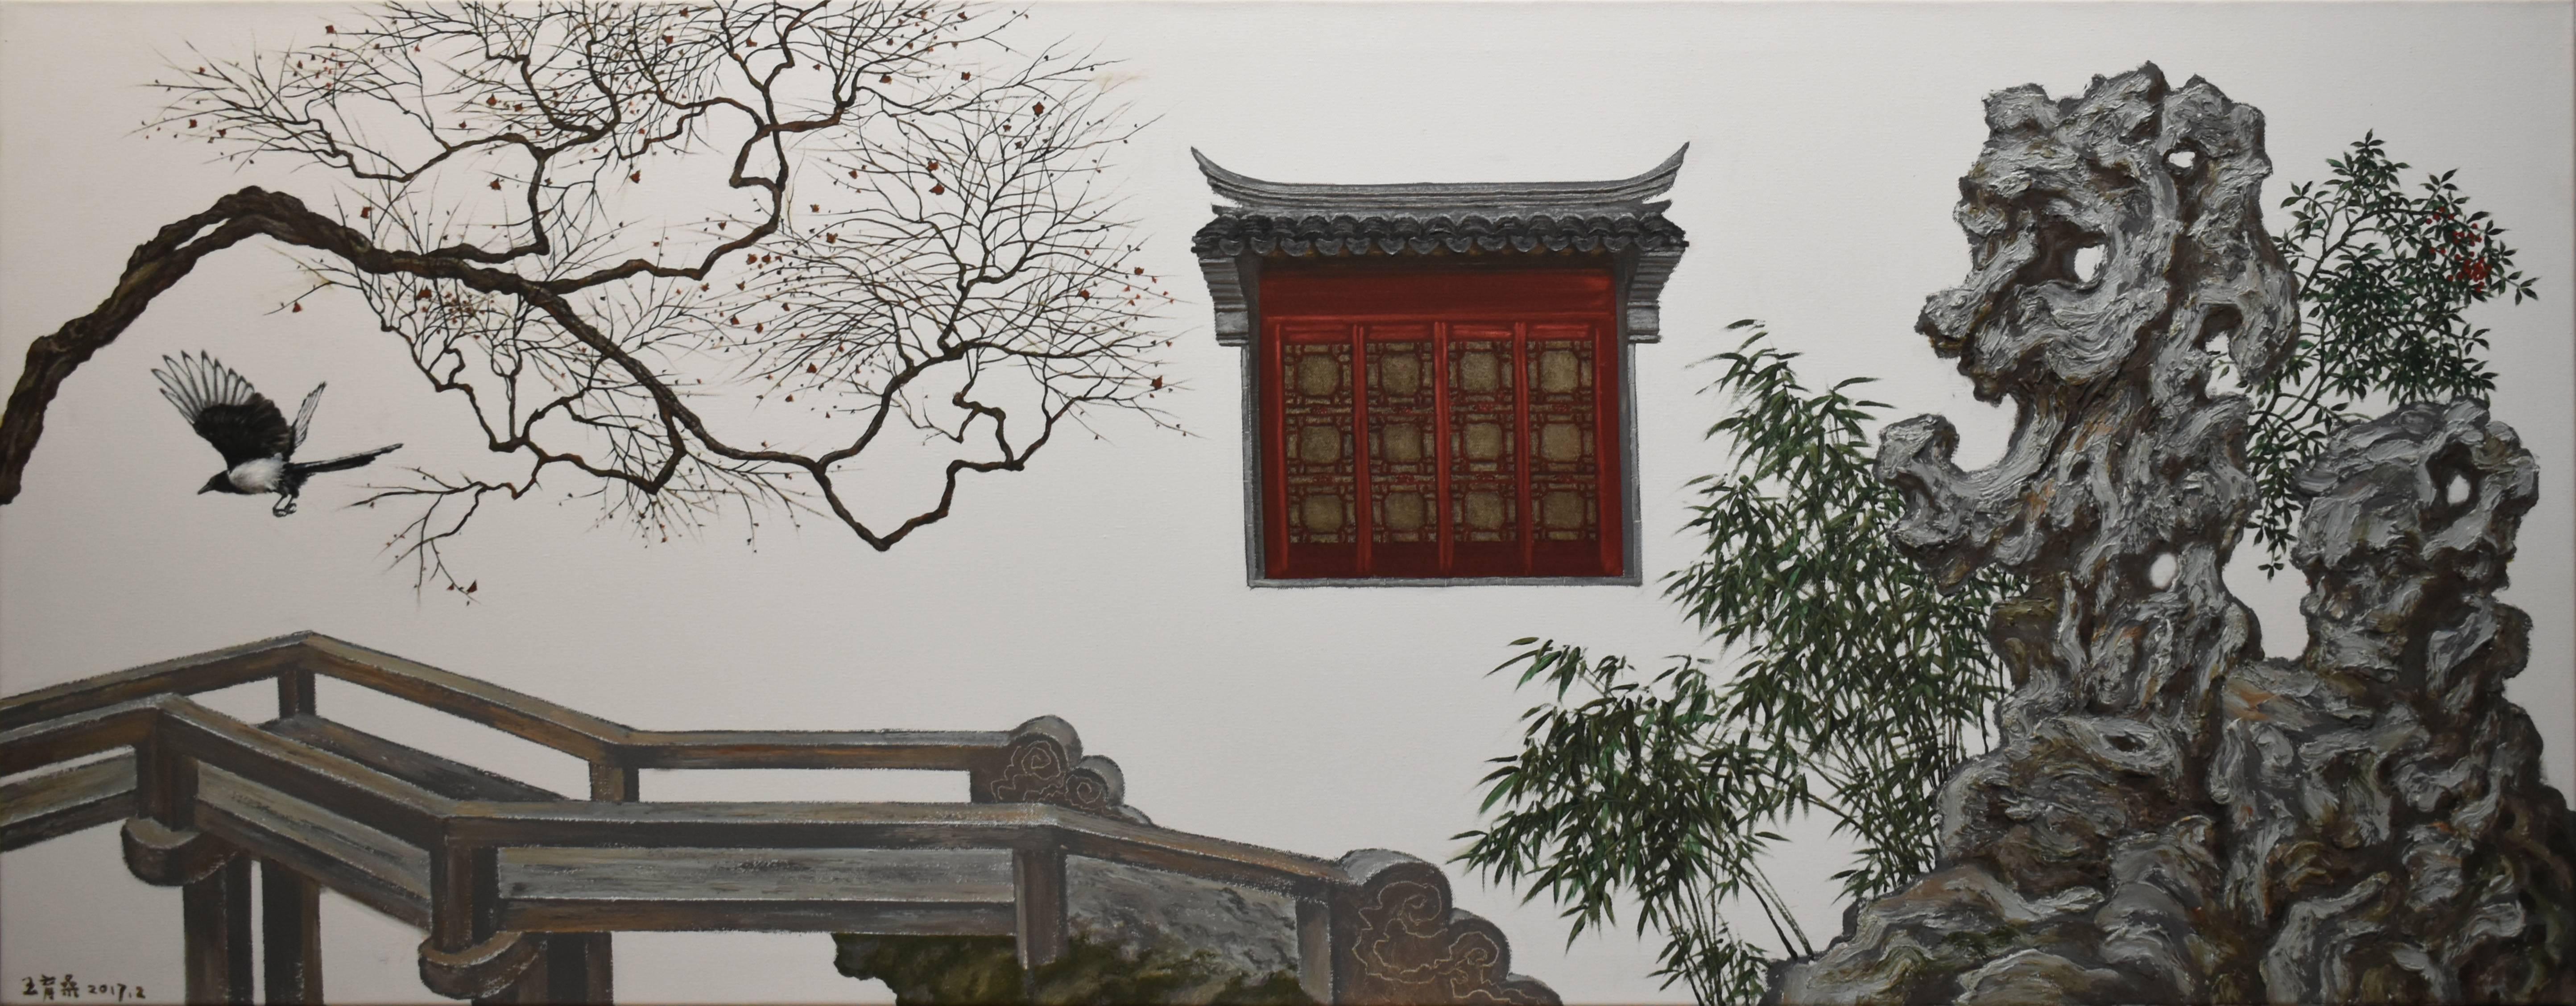 Edward Wang Still-Life Painting - Poetic & Romantic Suzhou Garden & bird and rock portrayed in conceptual style